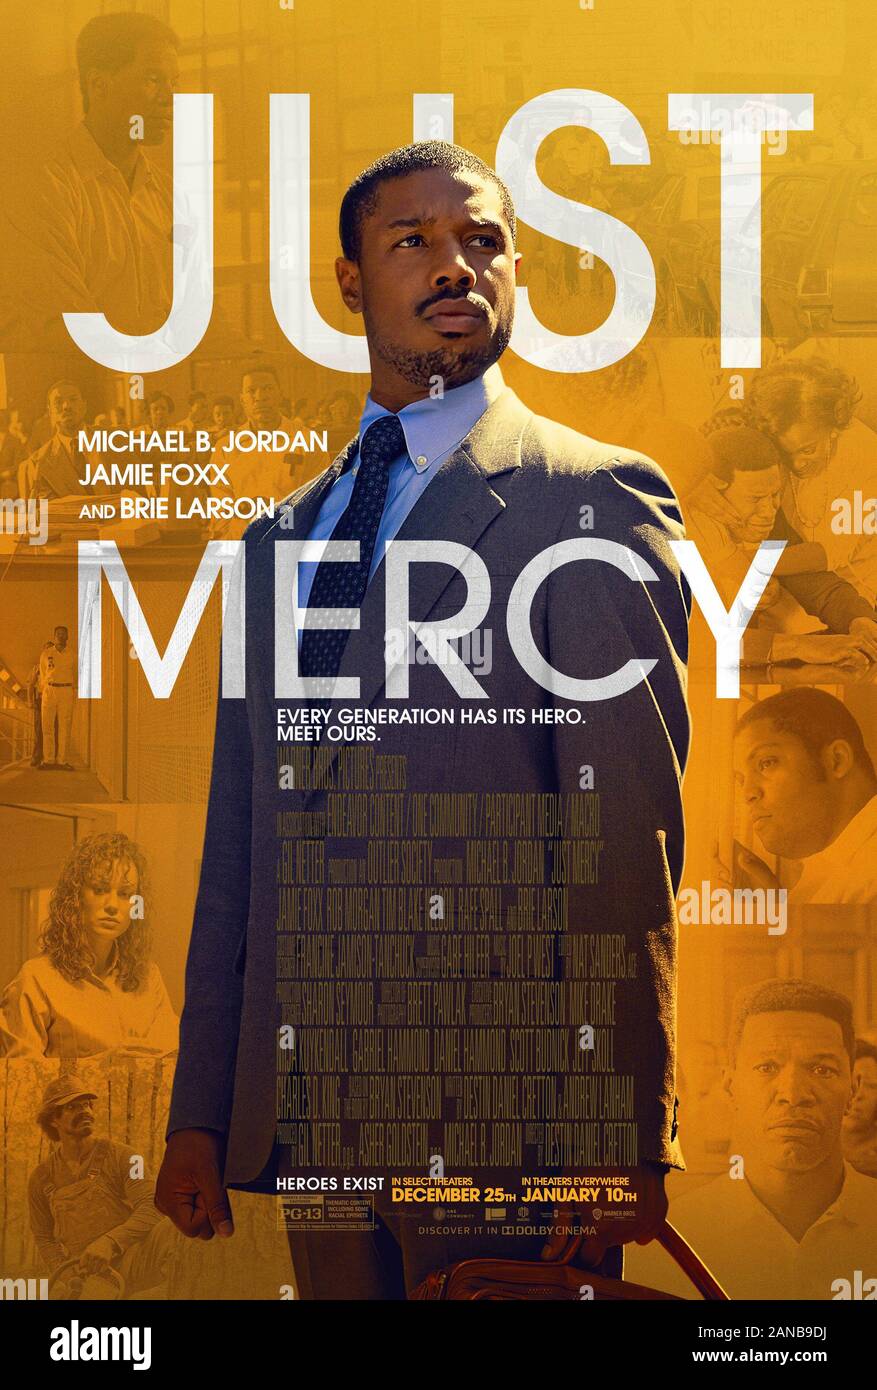 Just Mercy (2019) directed by Destin Daniel Cretton and starring Marcus A. Griffin Jr., Michael B. Jordan, Jamie Foxx and Brie Larson. True story about civil rights defence attorney Bryan Stevenson fighting to free a wrongly convicted prisoner on death row. Stock Photo